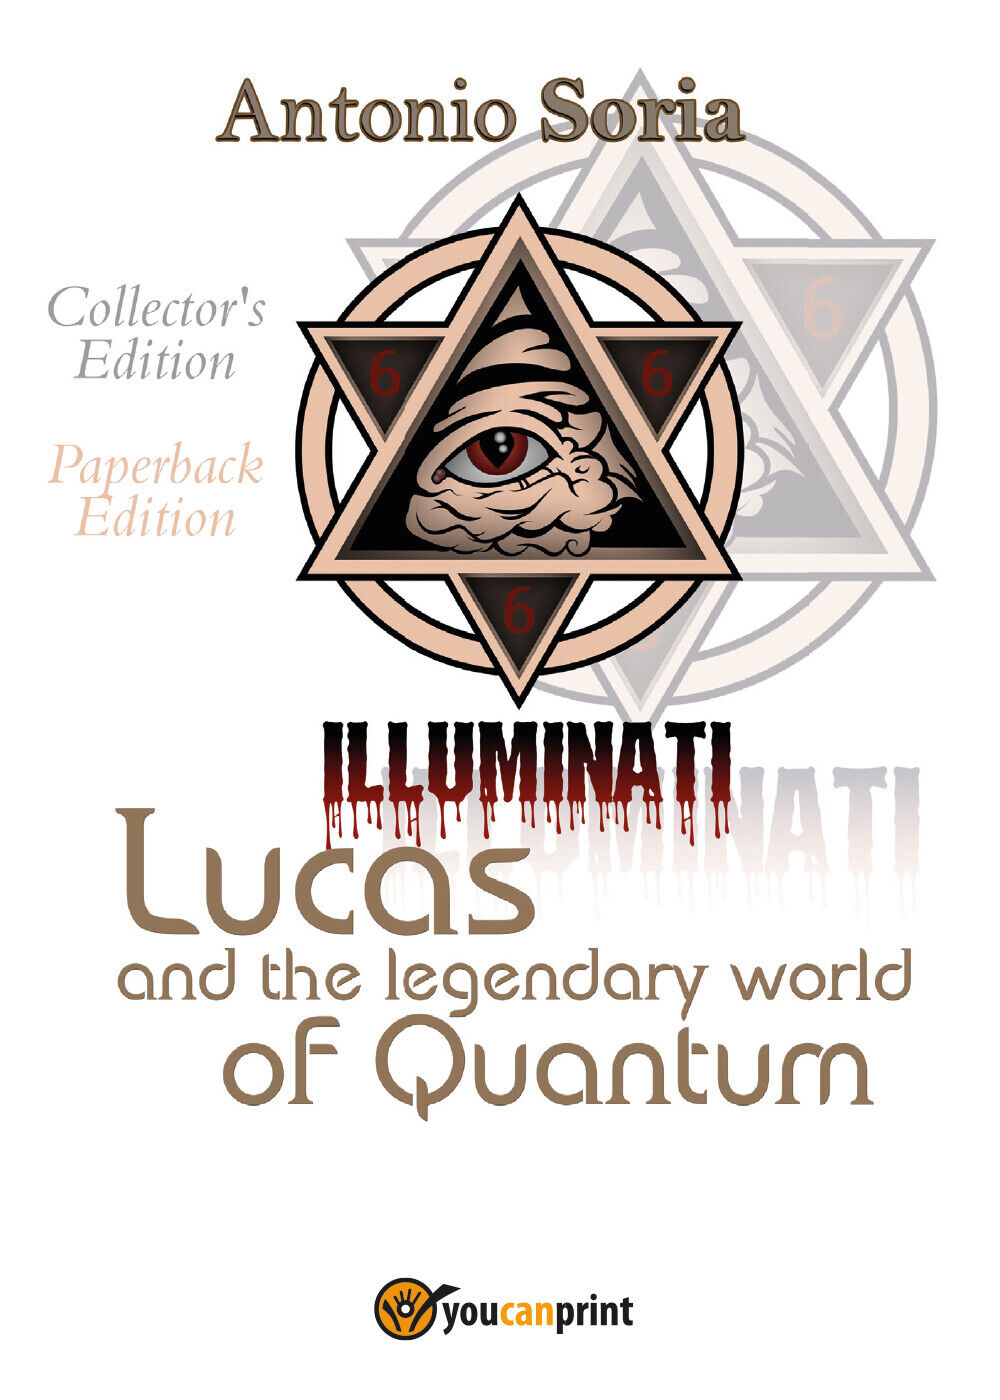 Lucas and the legendary world of Quantum (Paperback Edition) Collector?s  - ER libro usato